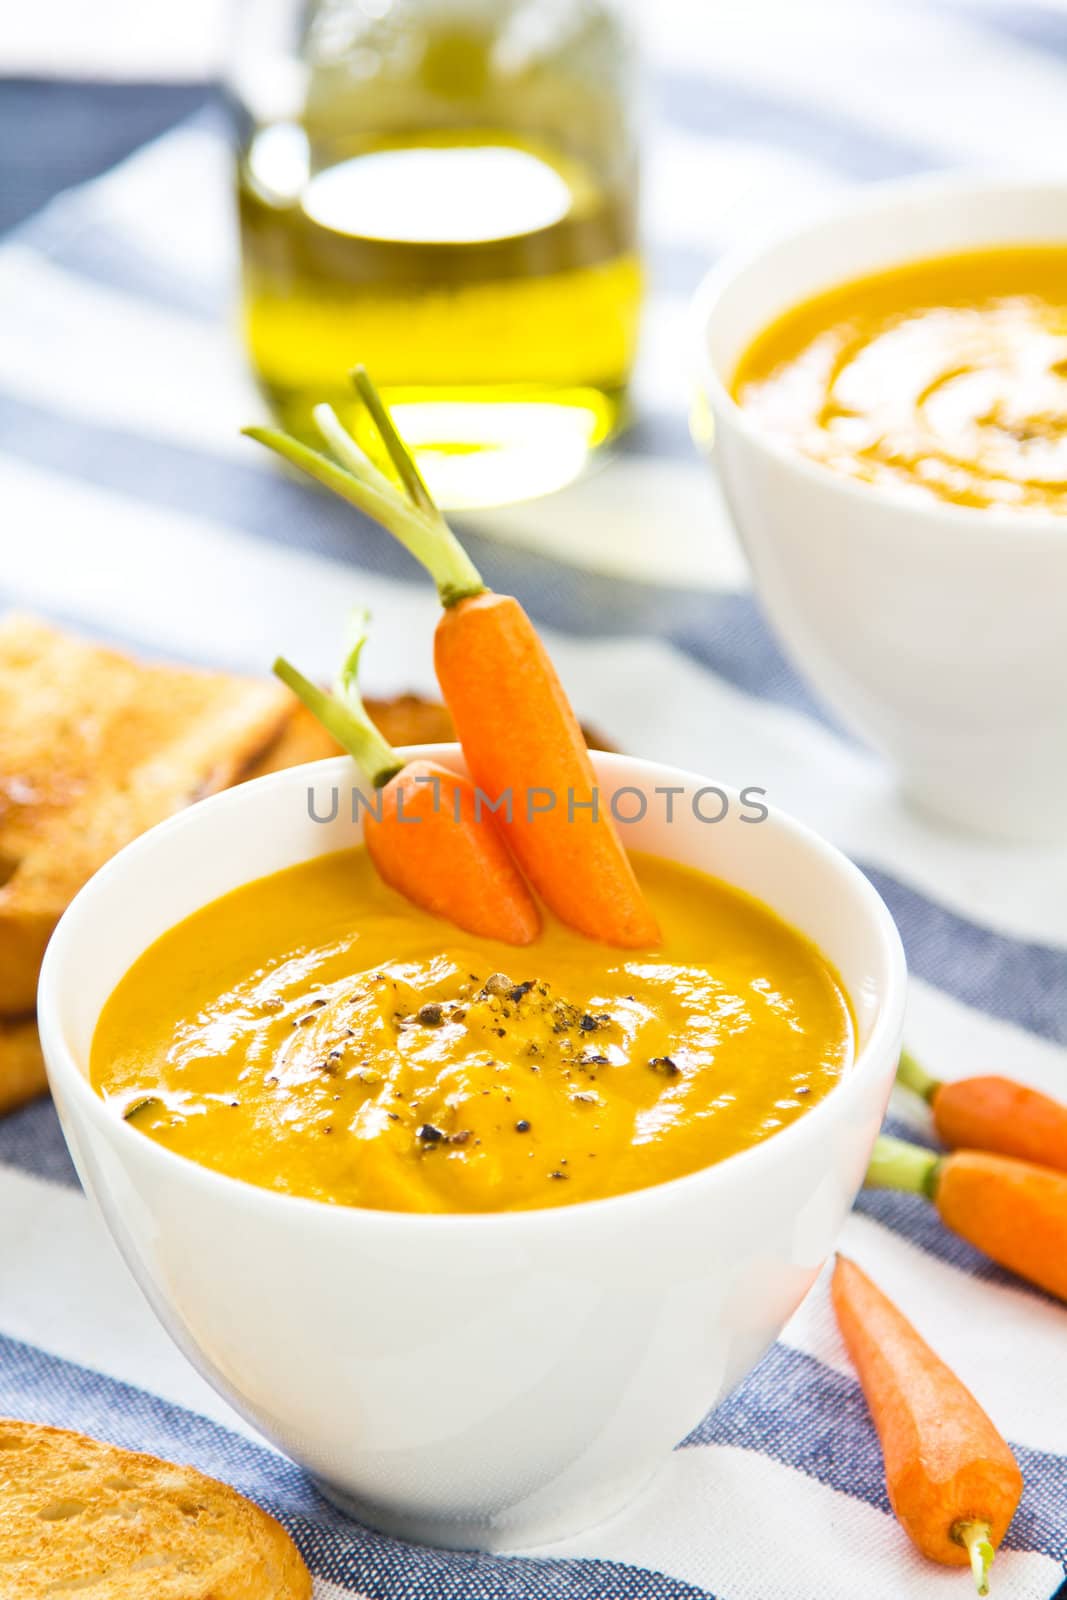 Carrot soup by vanillaechoes